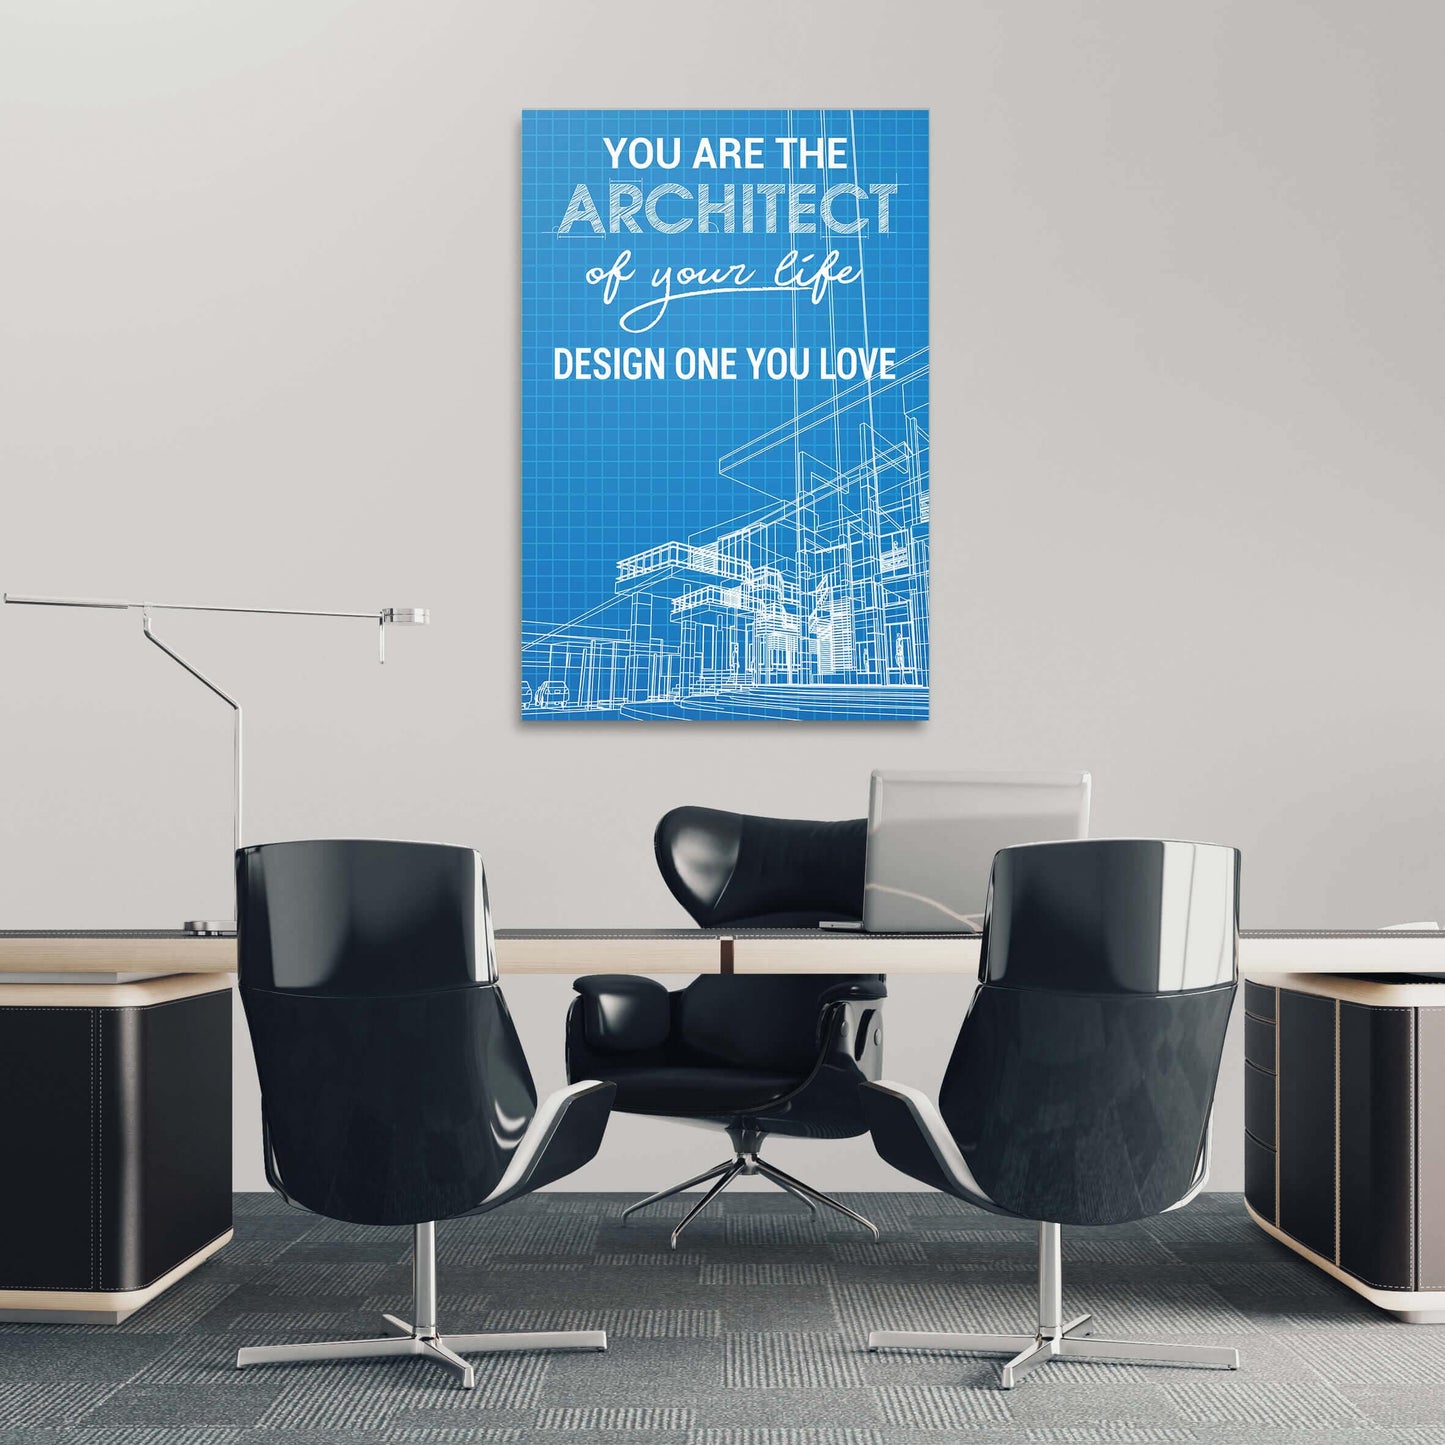 You Are The Architect of Tomorrow Wall Art | Inspirational Wall Art Motivational Wall Art Quotes Office Art | ImpaktMaker Exclusive Canvas Art Portrait